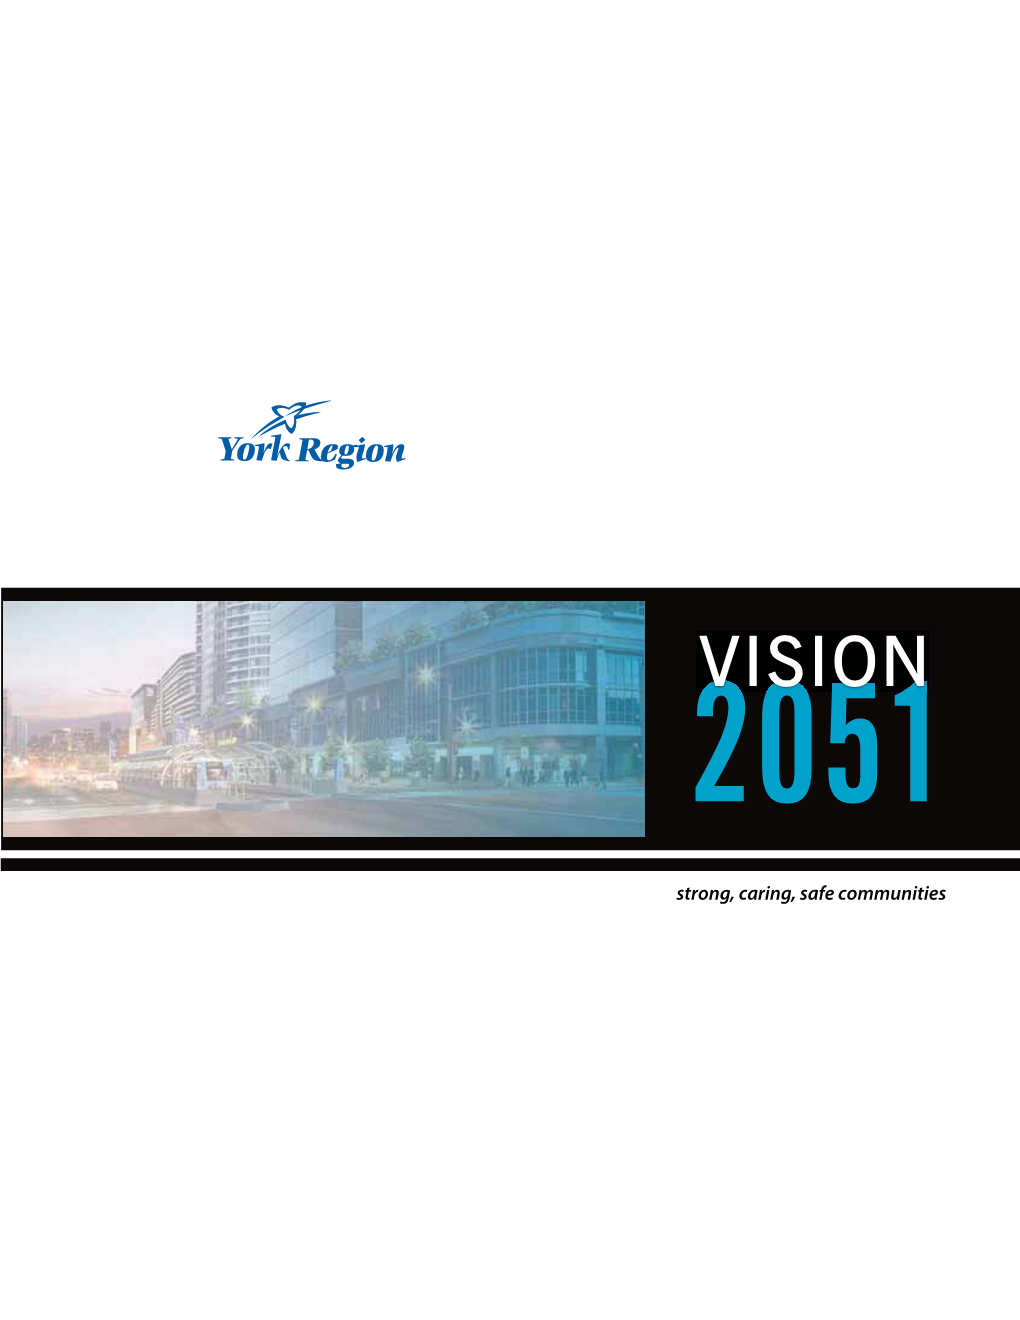 Vision 2051 Establishes a Blueprint for the Future of the Regional Municipality of York and Outlines the Steps We Can Take Collectively to Achieve Our Vision